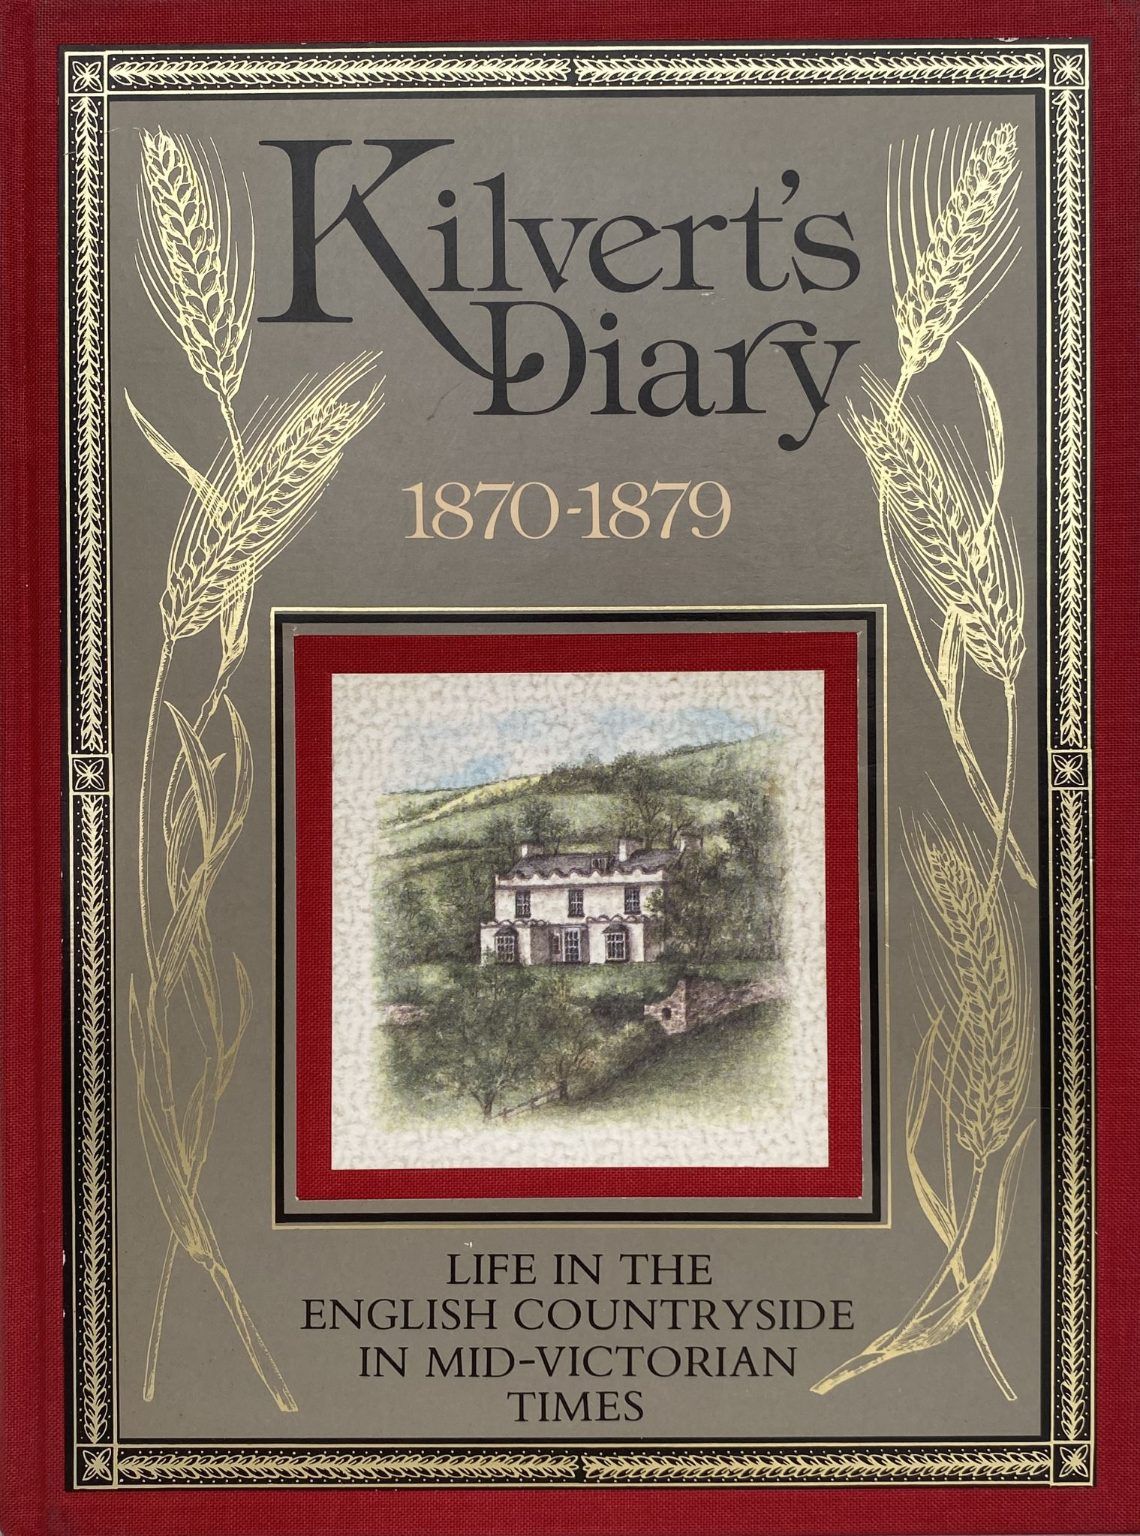 KILVERT'S DIARY 1870-1879: Life in English Countryside in Mid-Victorian Times